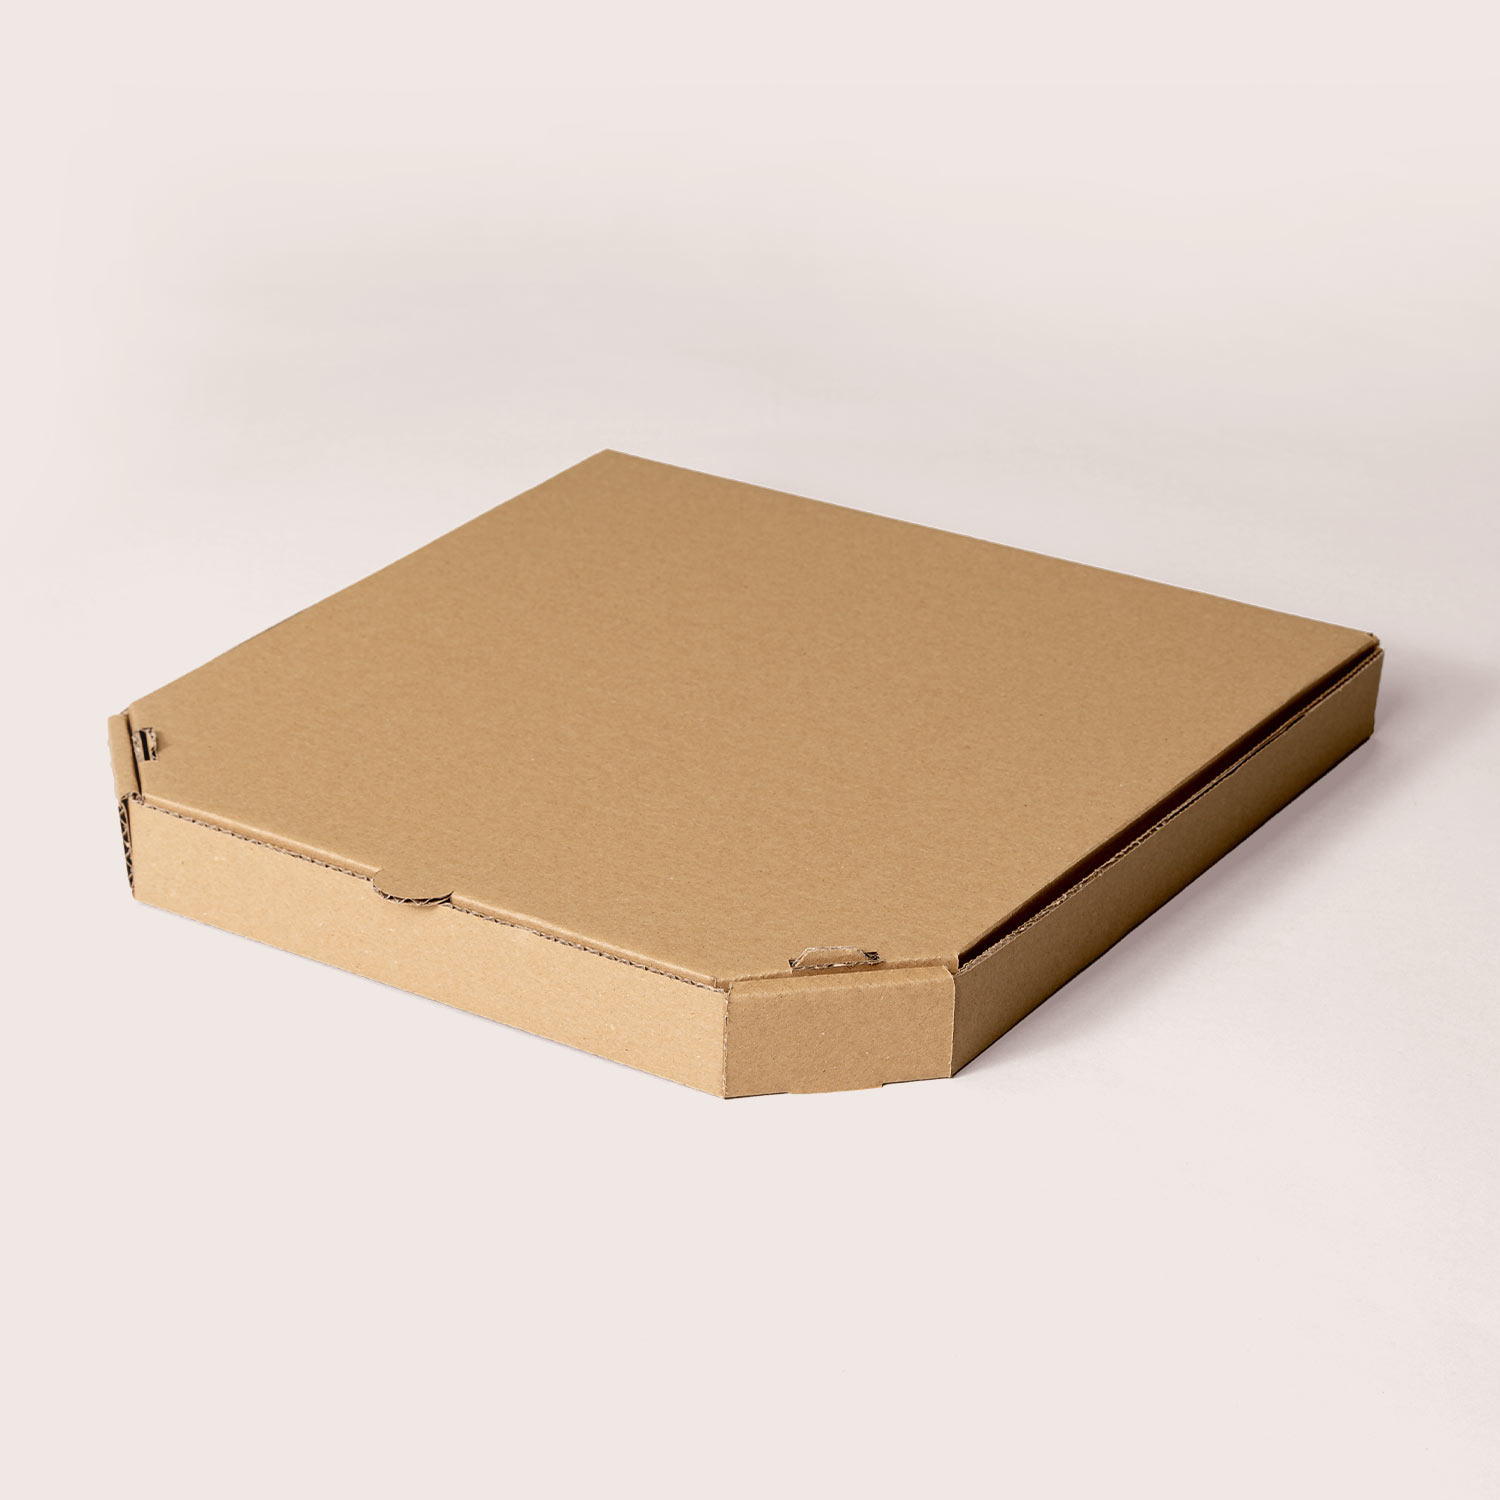 Pizza boxes made from corrugated cardboard